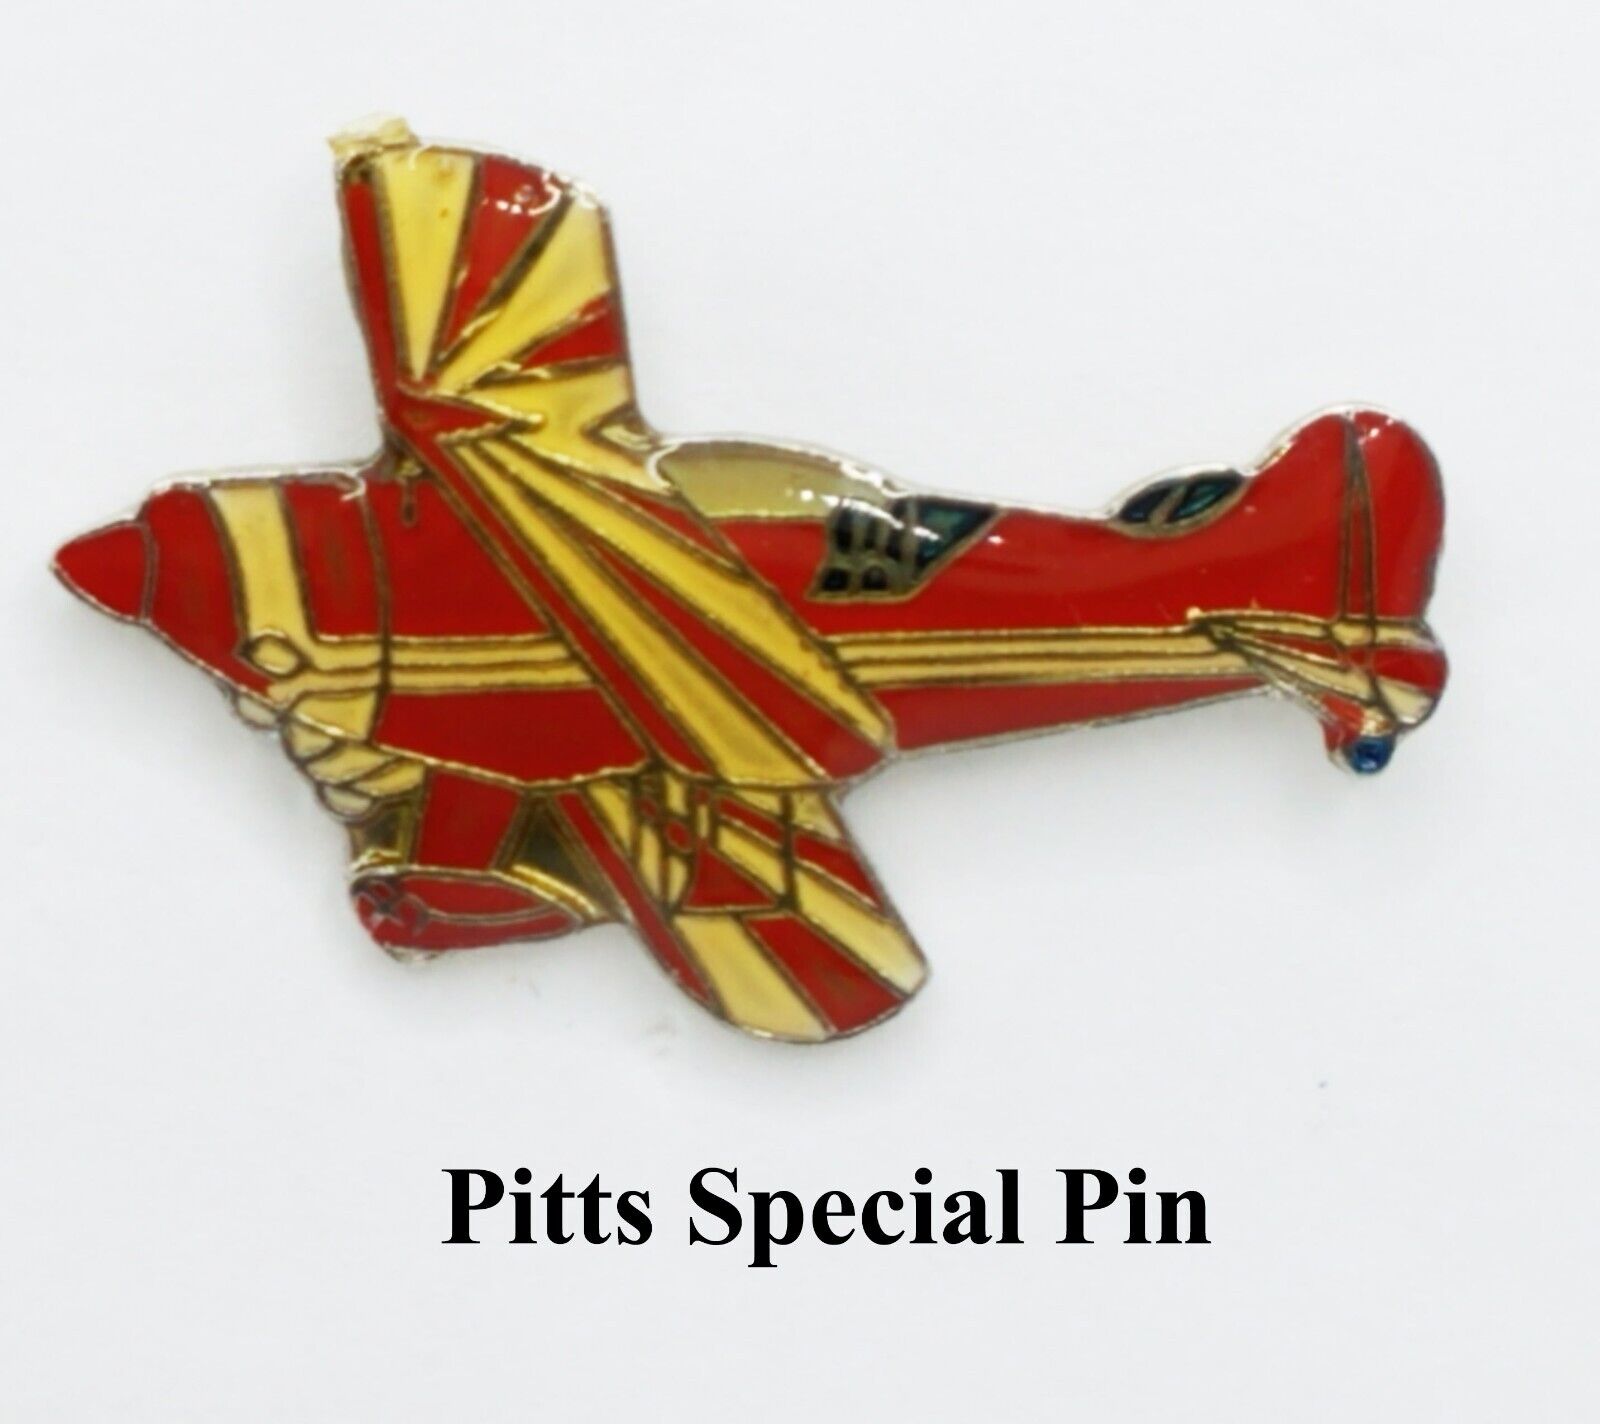 PITTS SPECIAL Airplane Pin